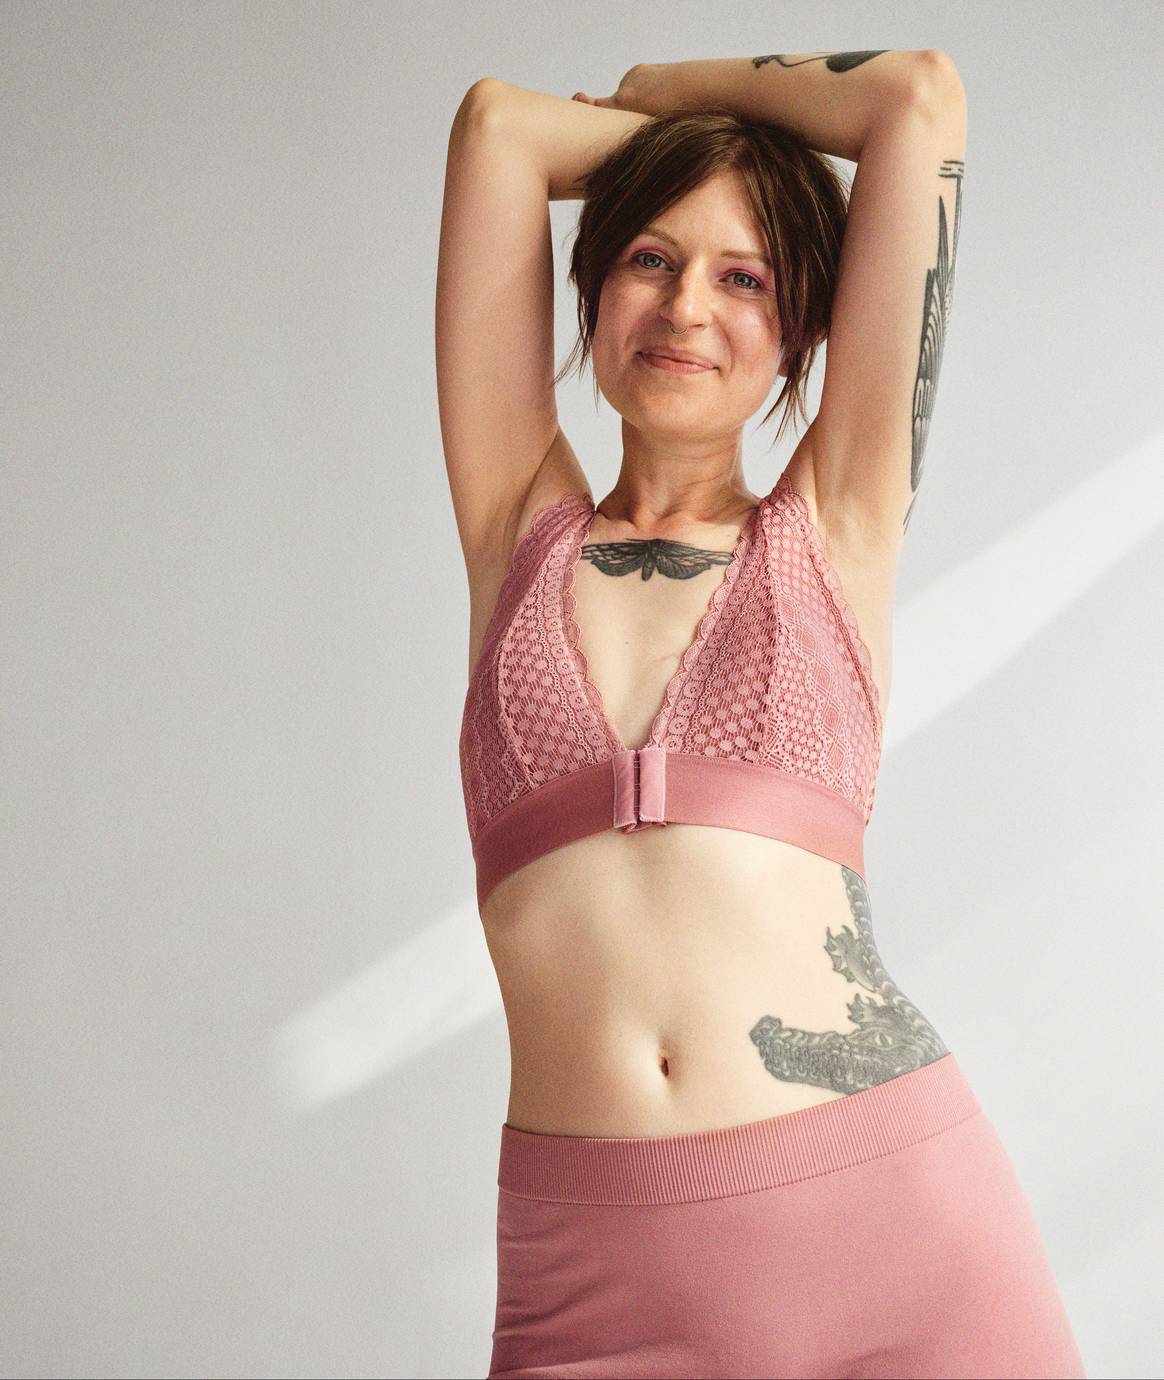 Strong and beautiful' Primark praised for featuring breast cancer survivors  in new inclusive lingerie campaign